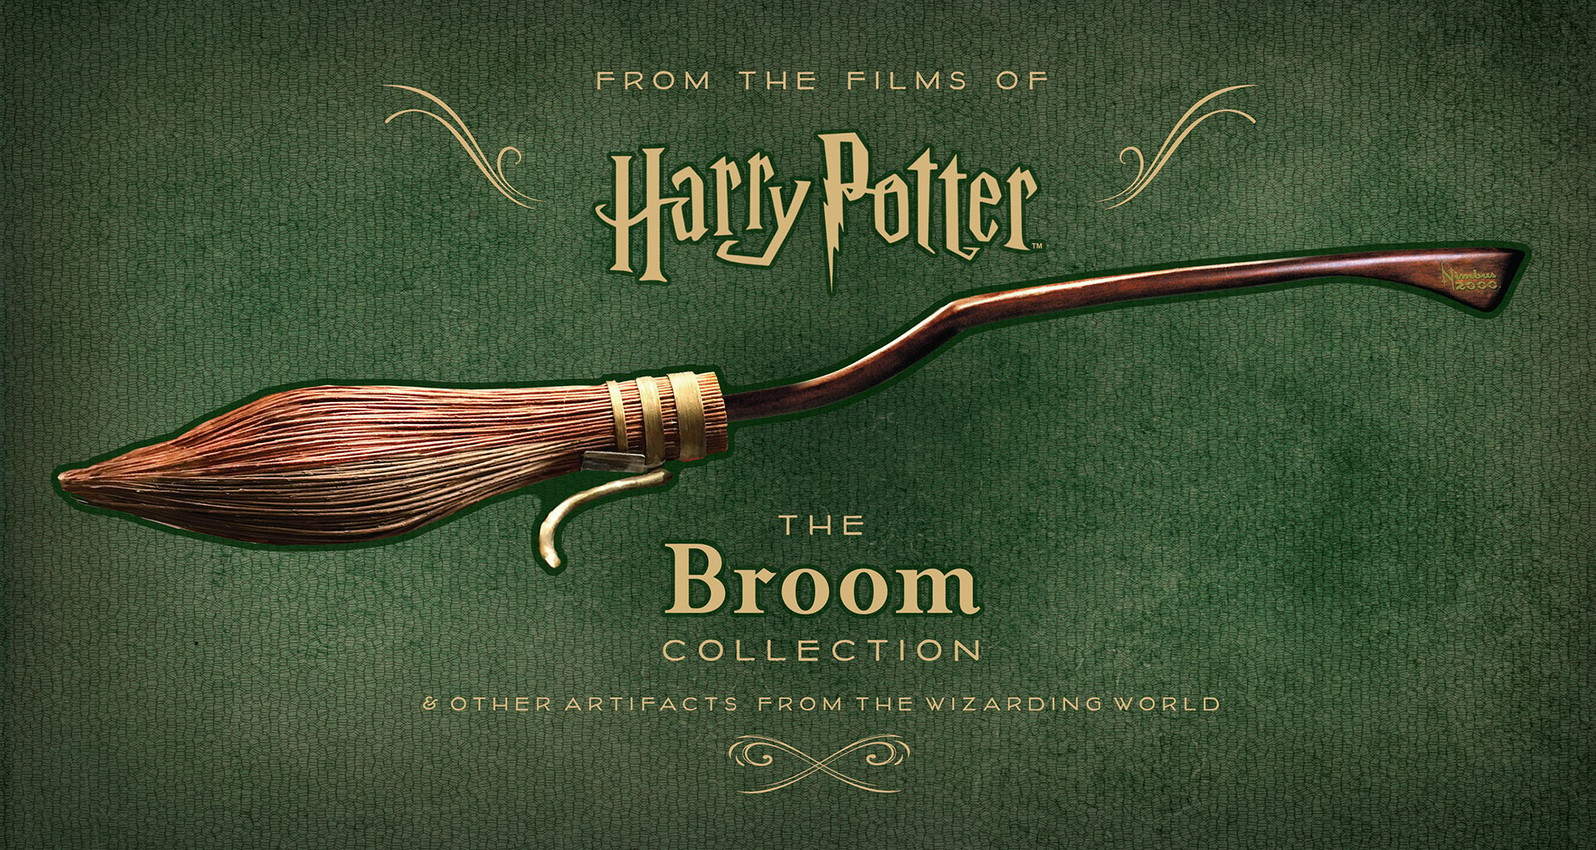 Harry Potter: The Broom Collection View 1